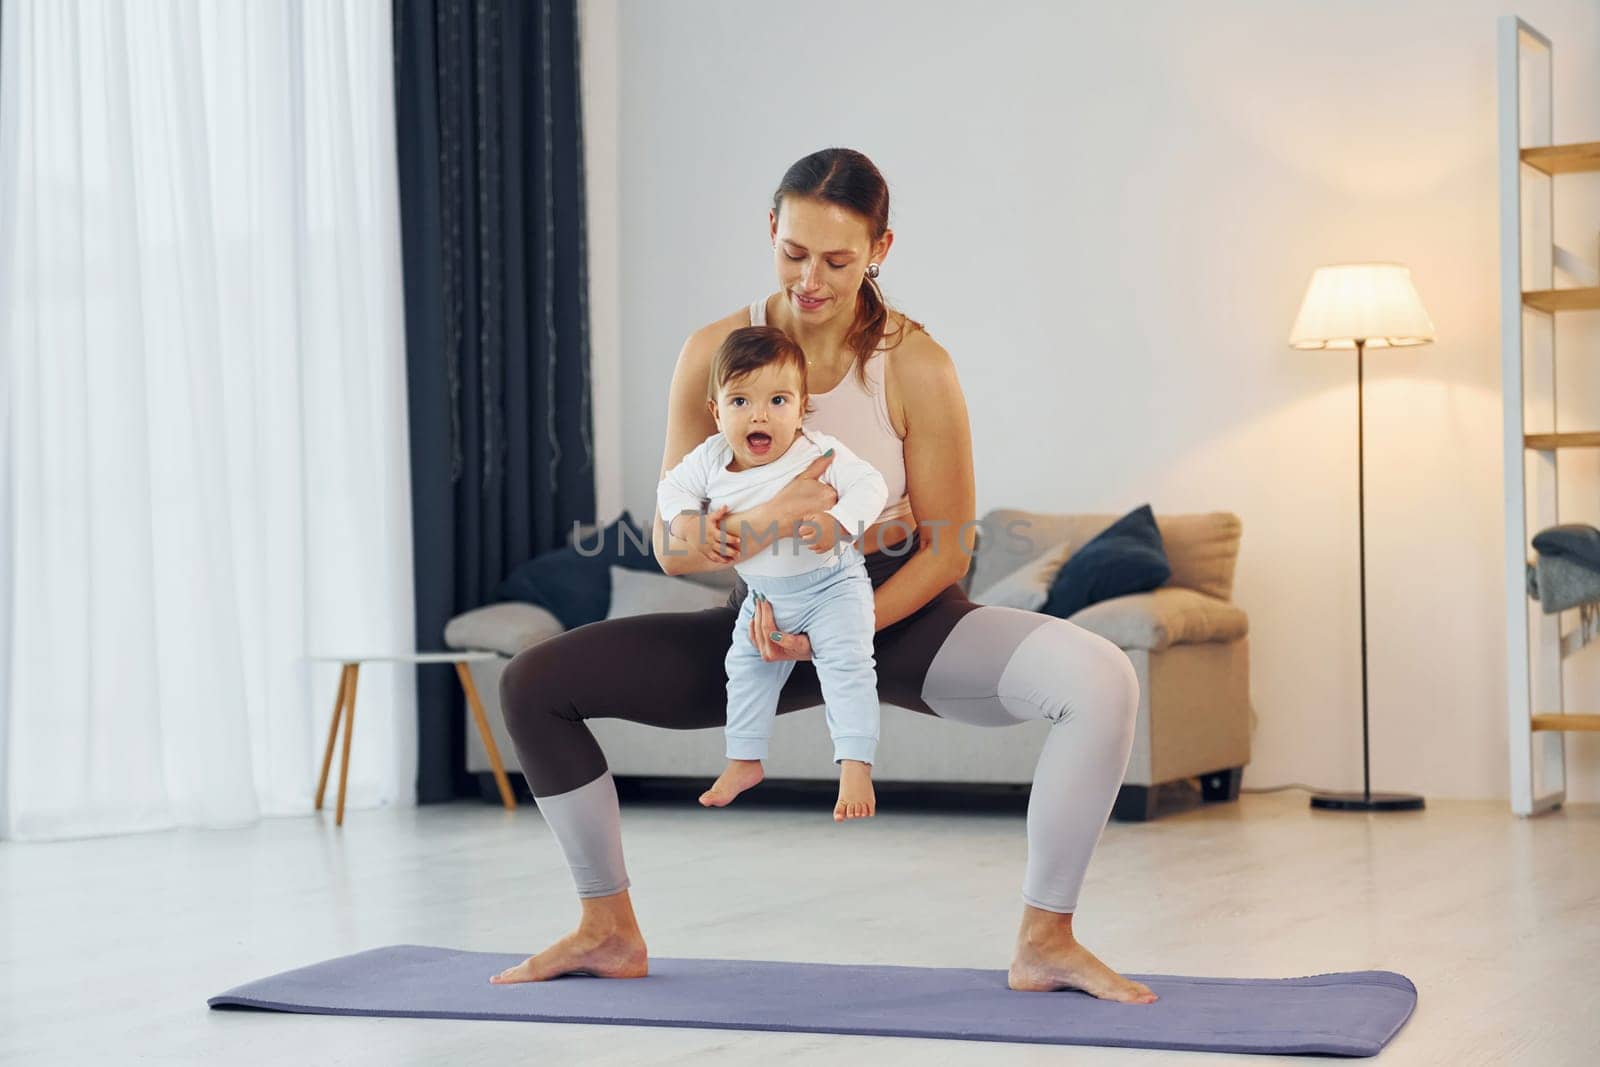 Teaching fitness. Mother with her little daughter is at home together by Standret